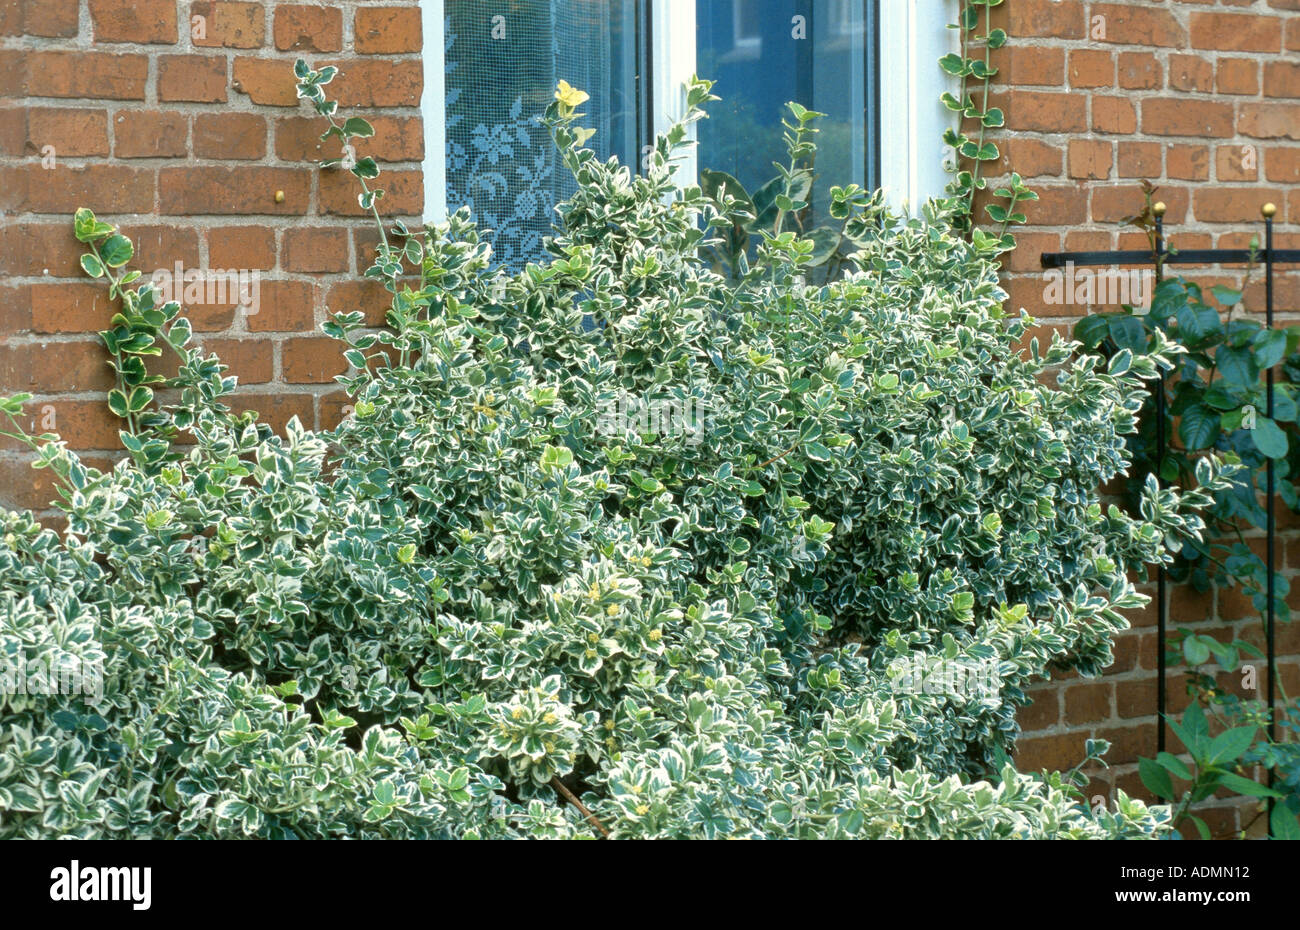 Silver Queen euonymus (Euonymus fortunei 'Silver Queen'), ornamental shrub  before house wall Stock Photo - Alamy